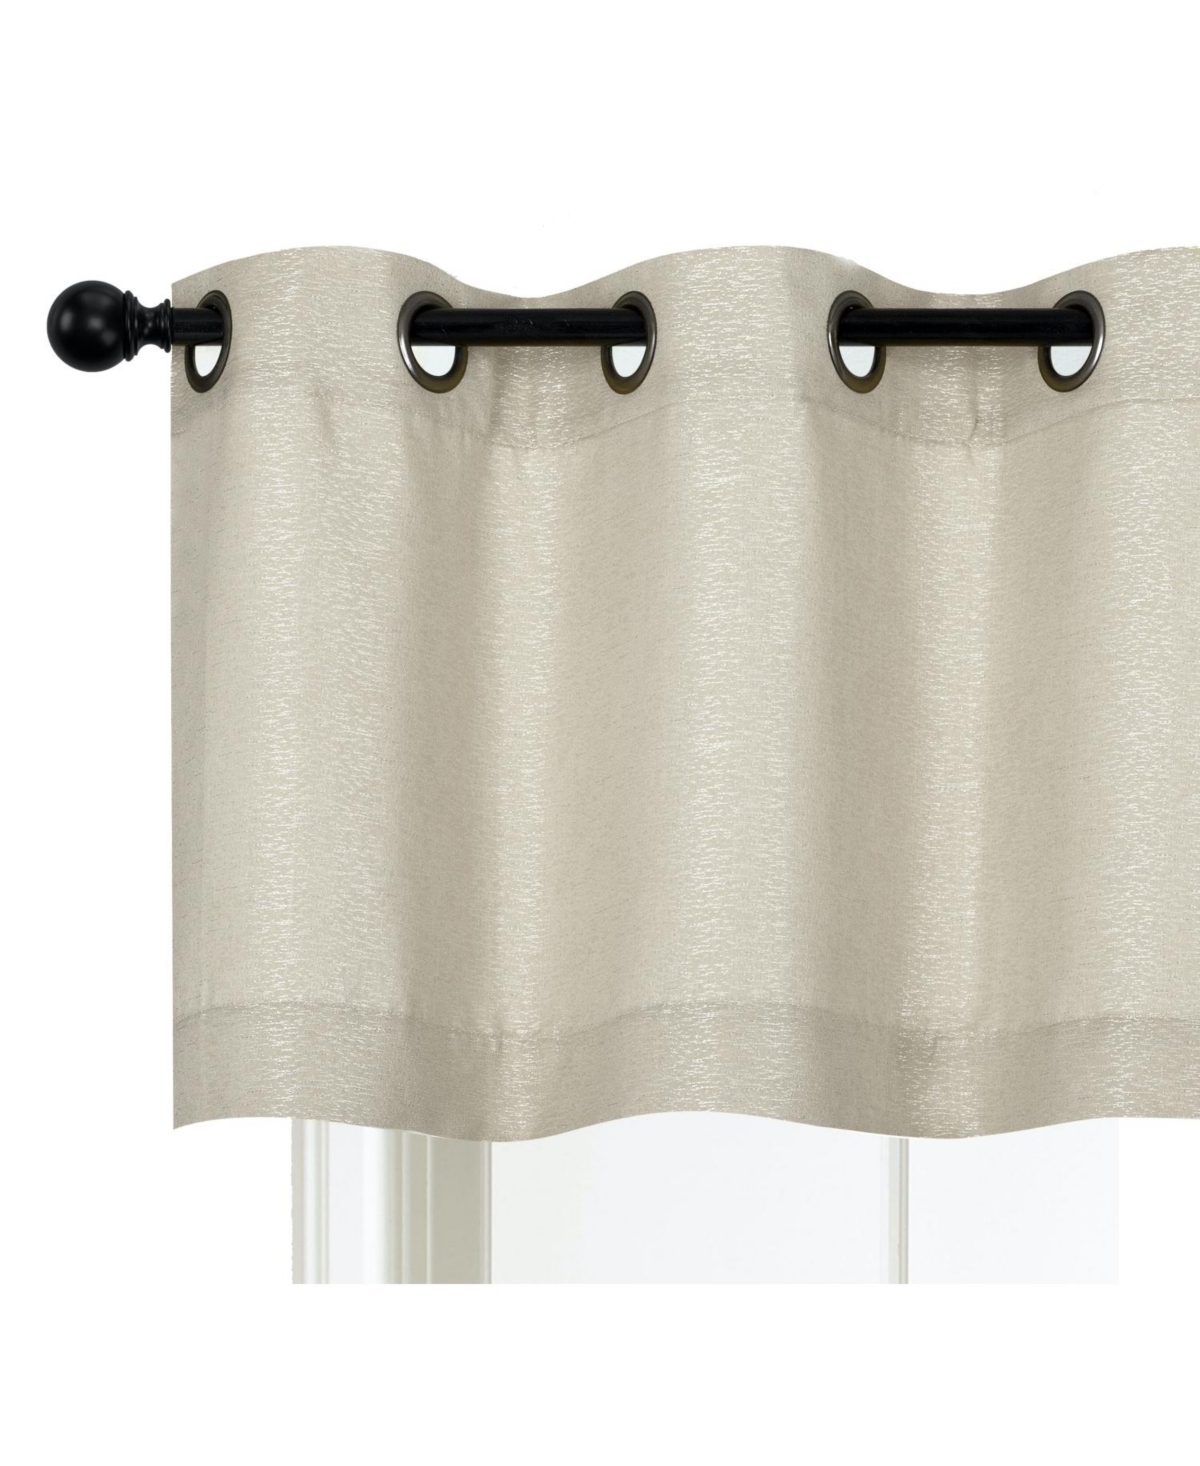 Oversized Grommet Top Solid Color Window Valance Curtain - Monroe gray